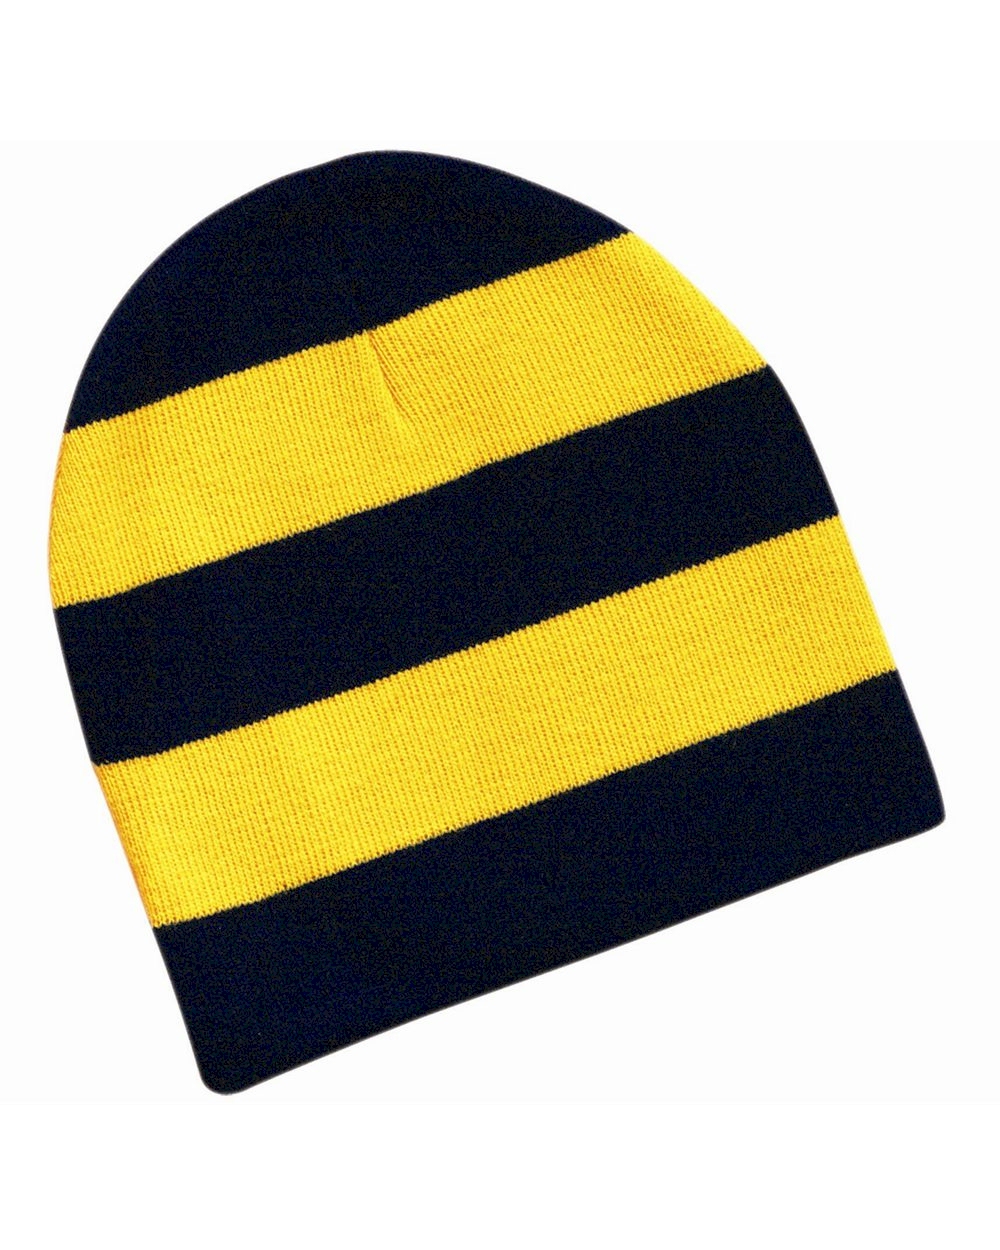 Rugby Striped Knit Beanie Embroidery Blanks - Black/Gold